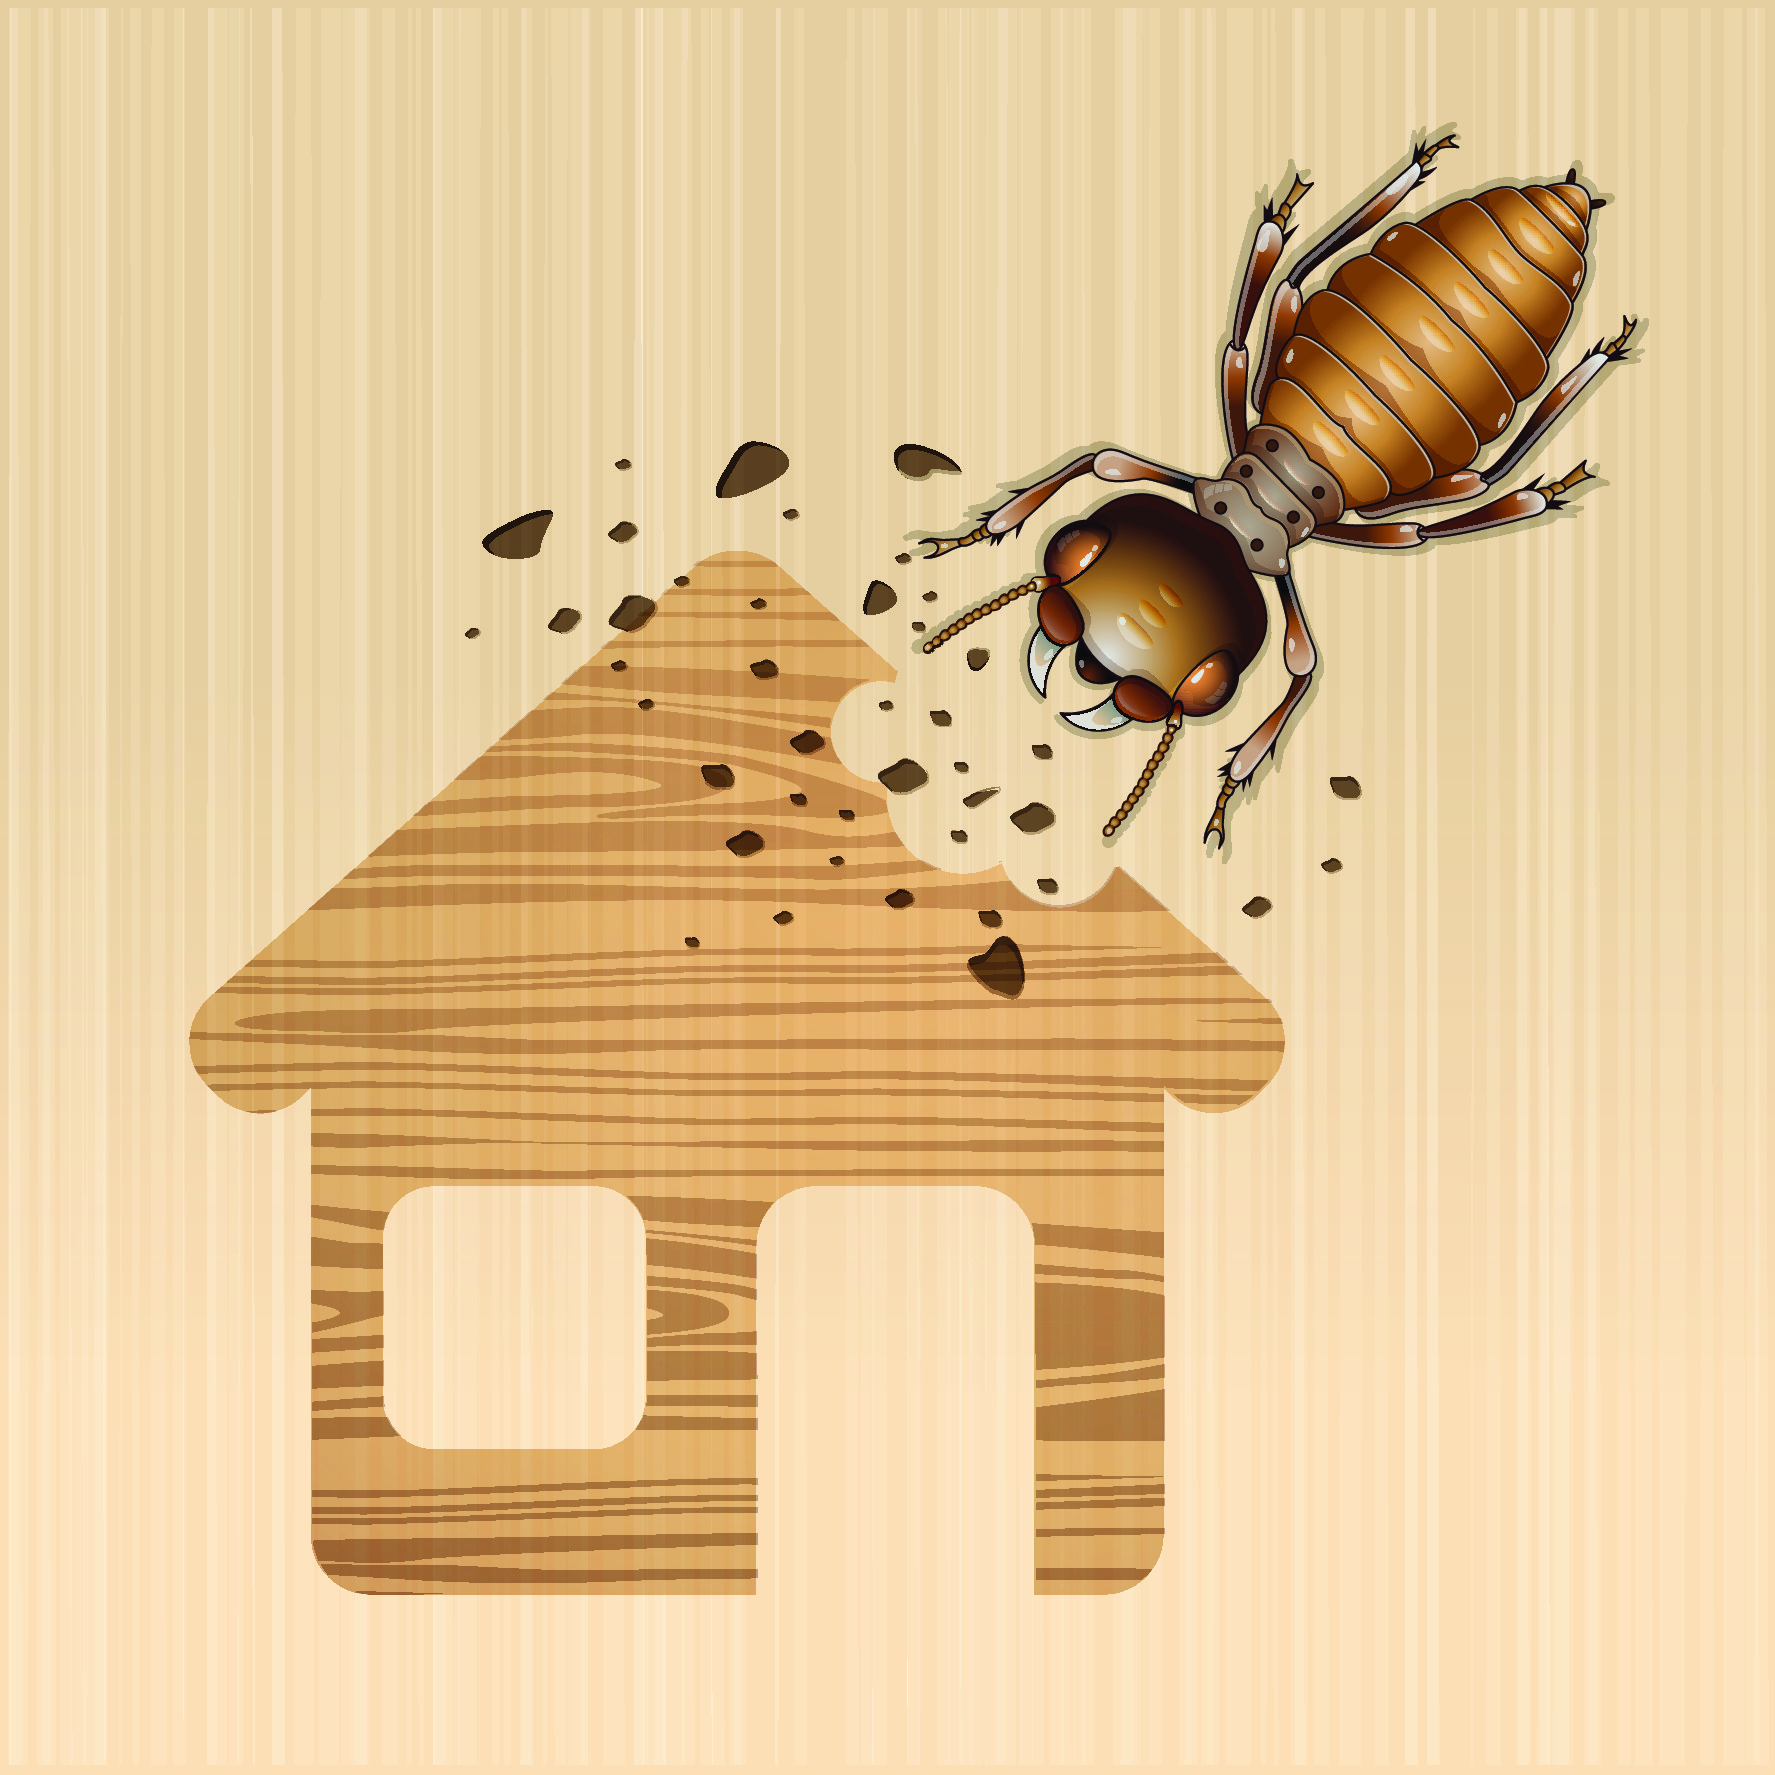 Termite Inspection Costs: How Much and Who Pays? | Home Bay